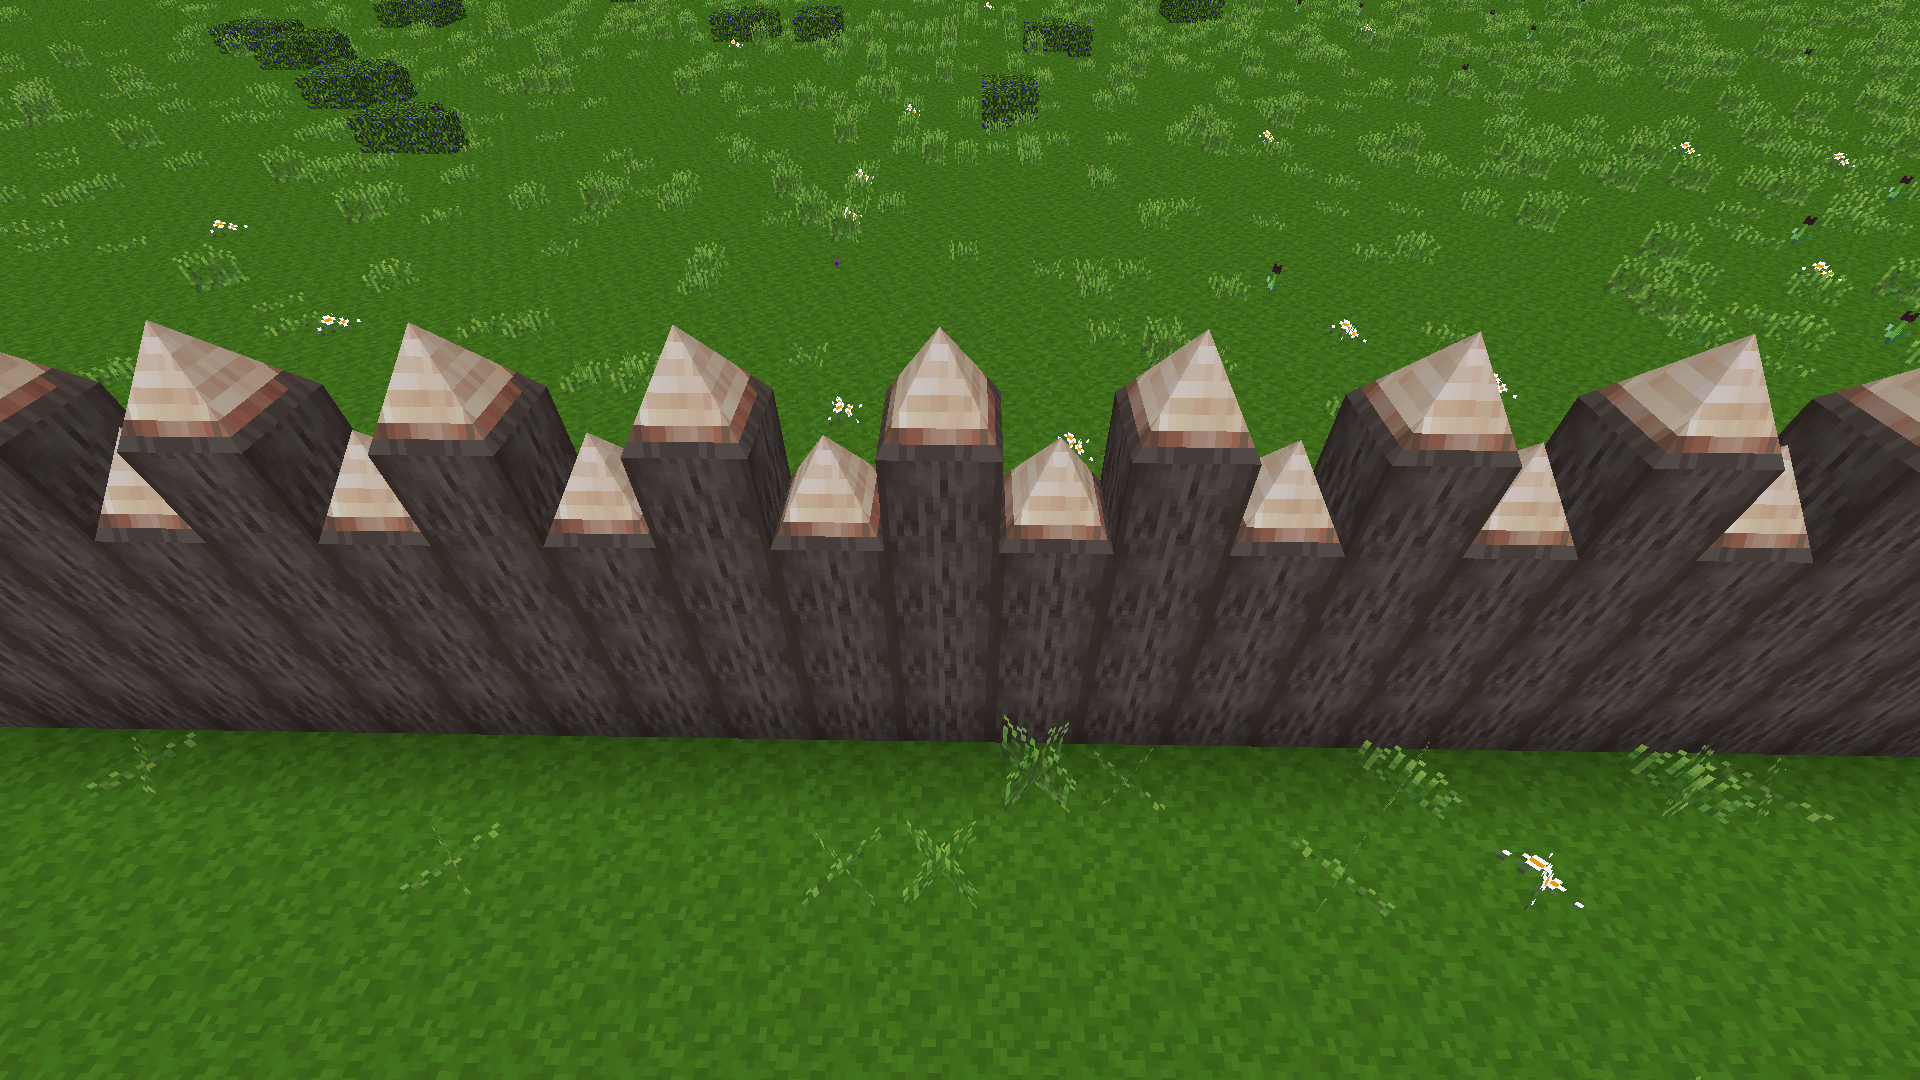 A spiked palisade made of pine logs